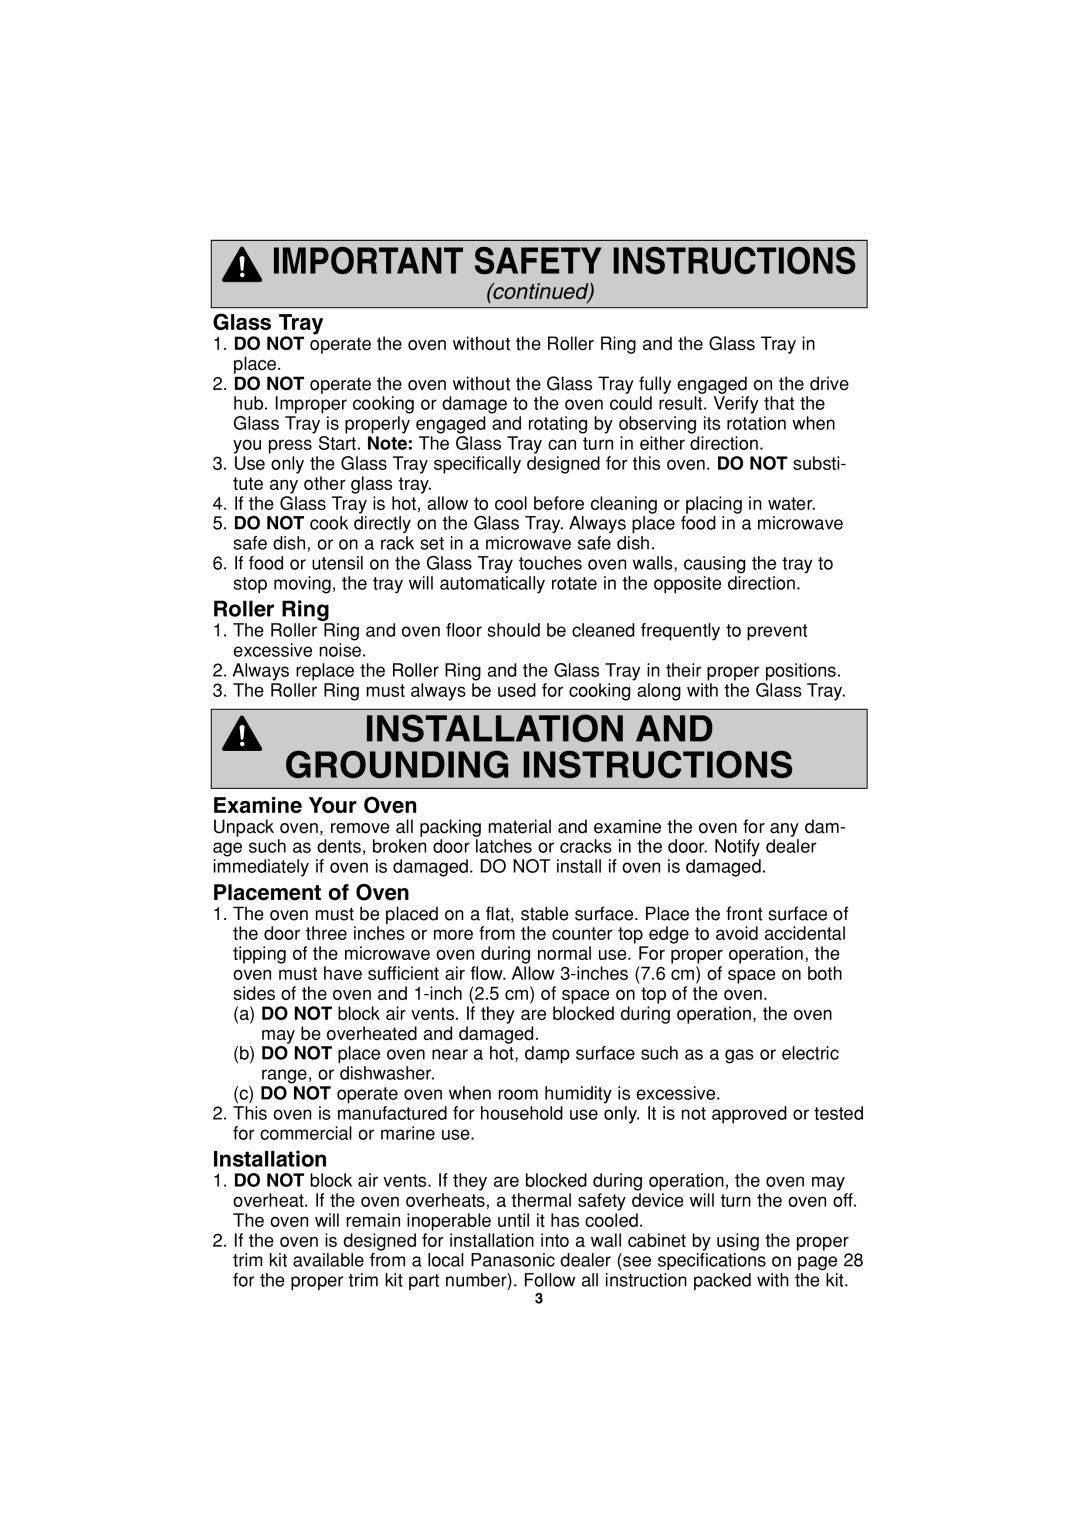 Panasonic NN-T993 Installation And Grounding Instructions, Glass Tray, Roller Ring, Examine Your Oven, Placement of Oven 